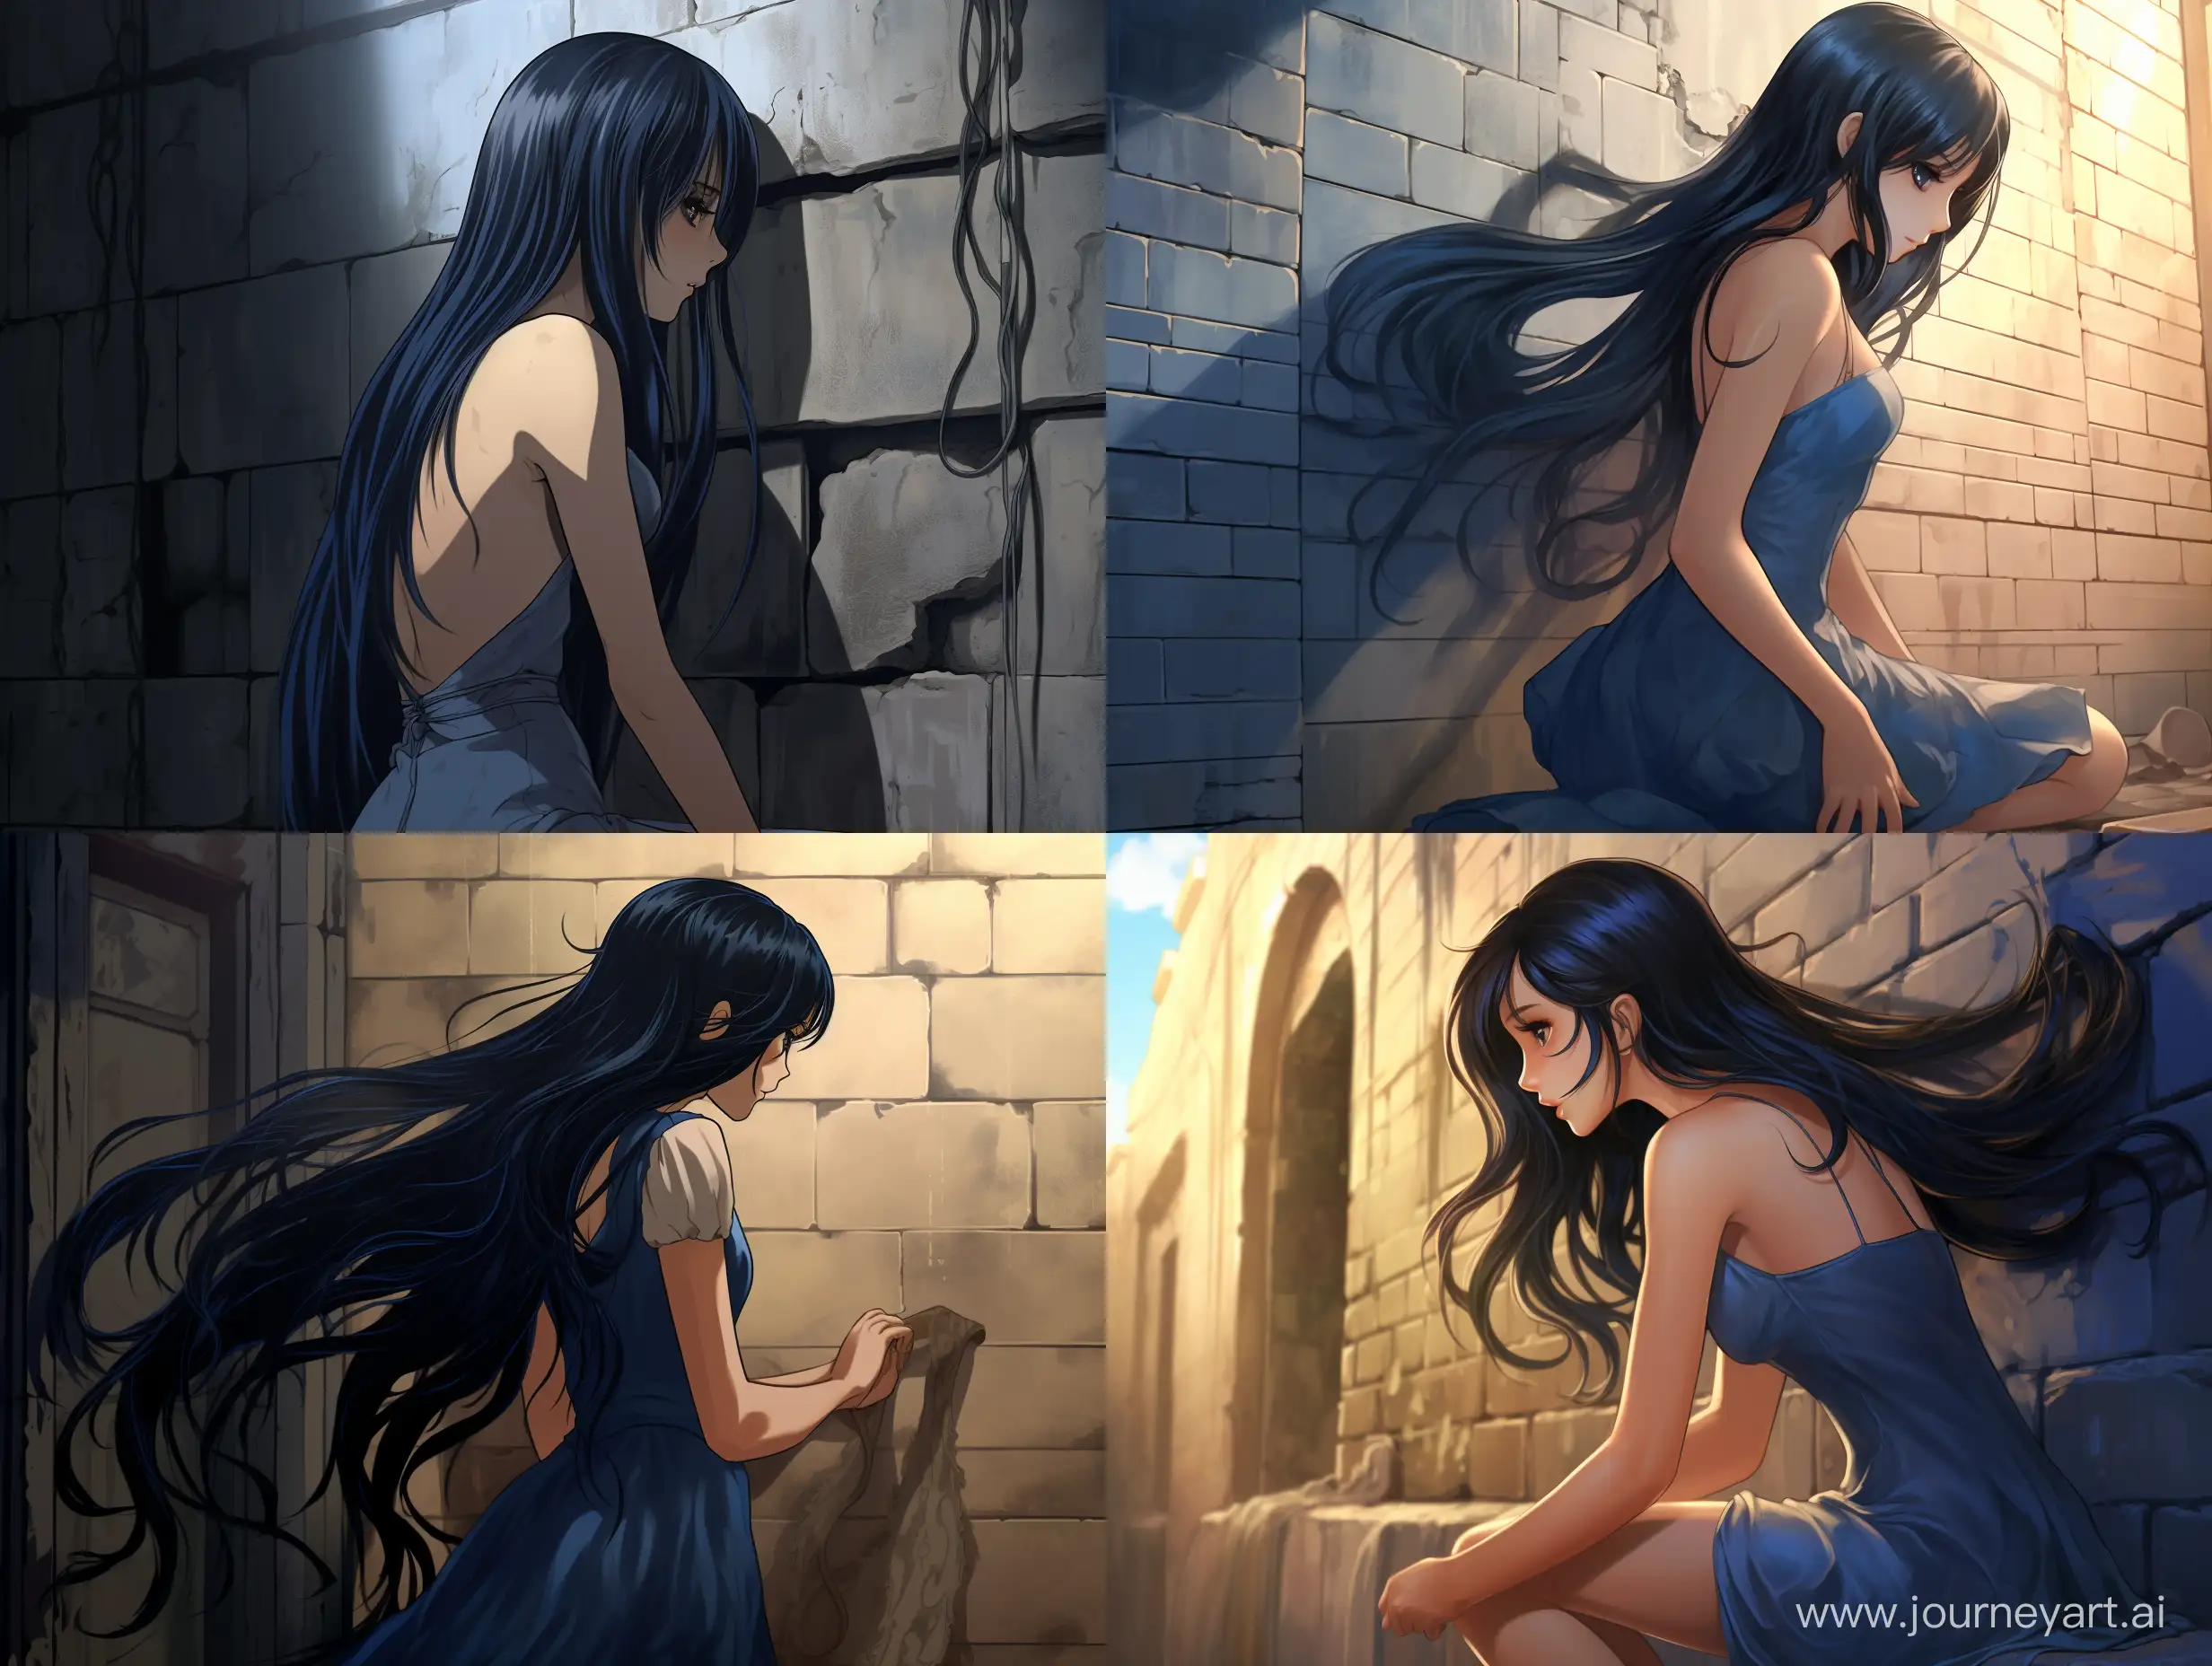 Elegant-Anime-Girl-in-Blue-Dress-Leaning-Against-Wall-with-Long-Black-Hair